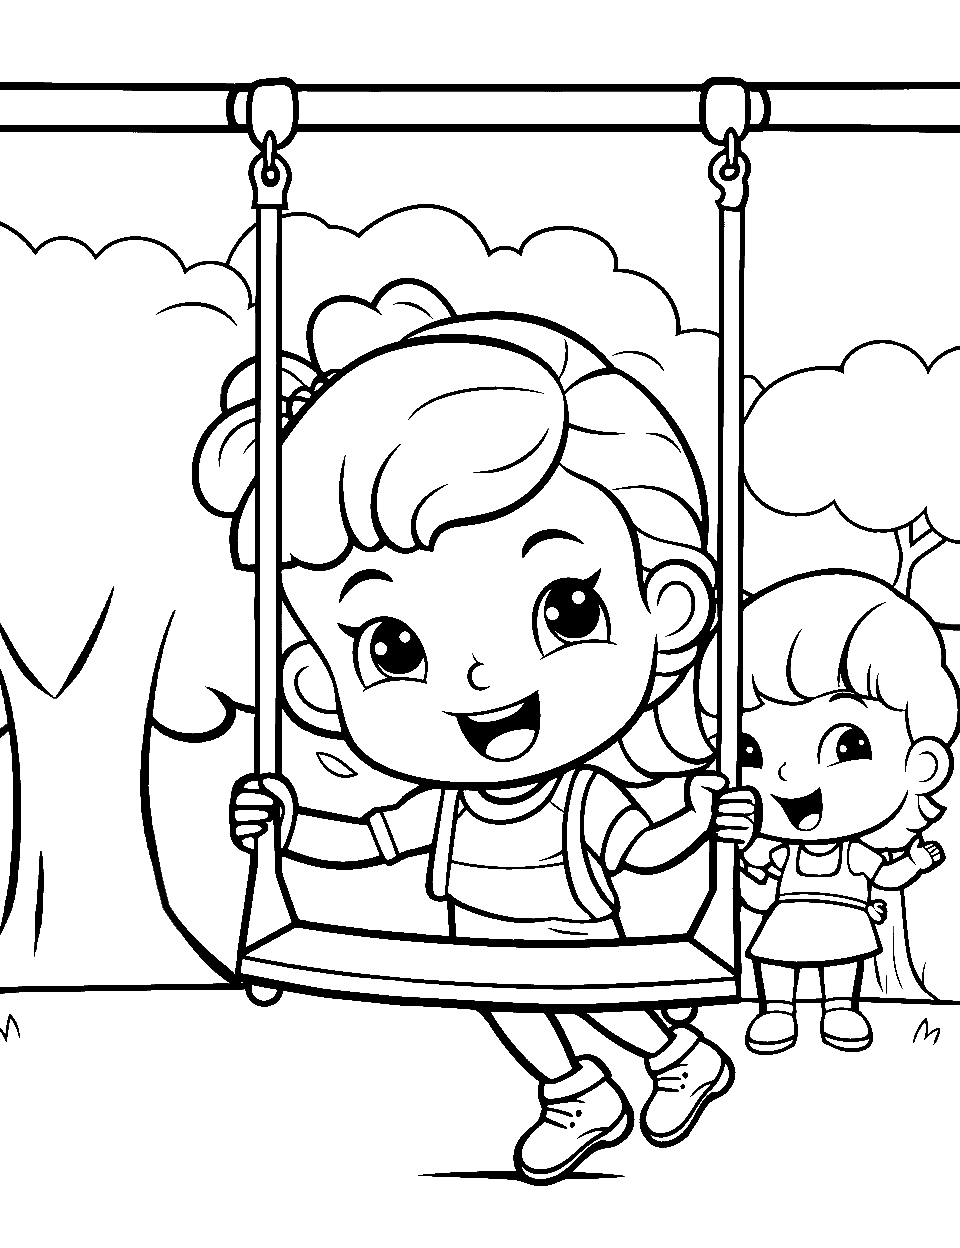 Park Playing Shopkins Coloring Page - Shopkins in a park ready to have fun on swings.